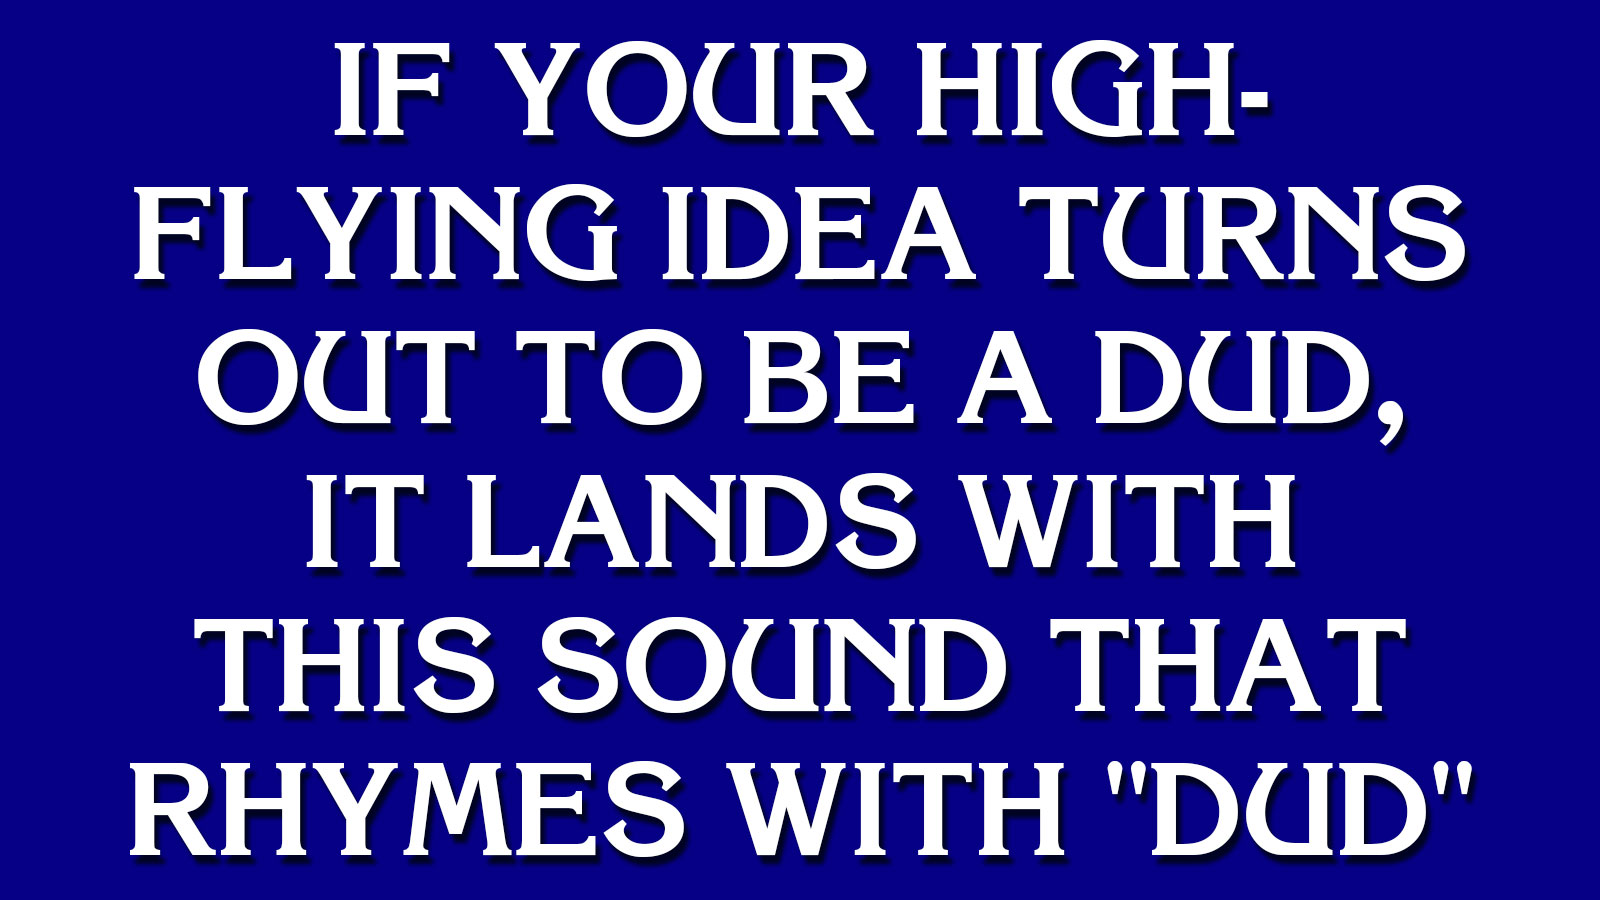 Can You Go on “Jeopardy!”? 22